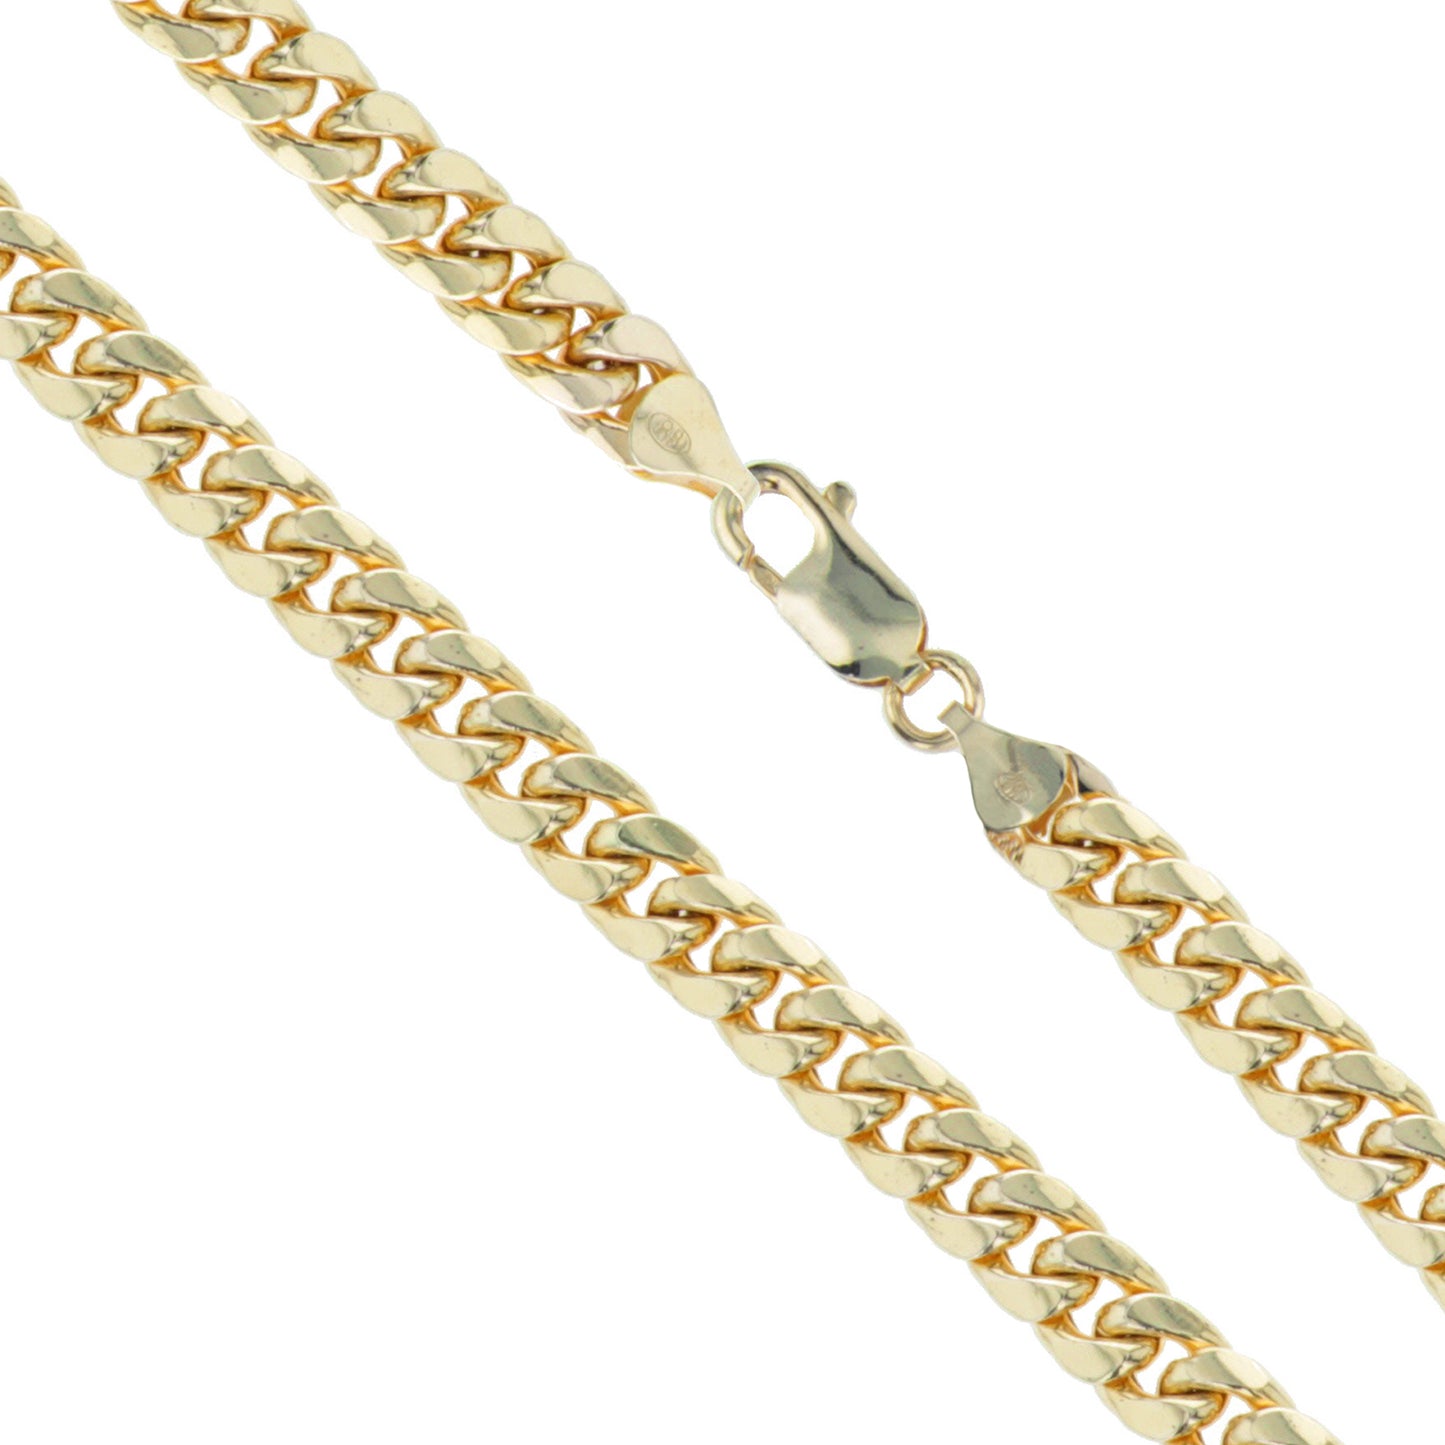 10k Yellow Gold-Hollow Curb Miami Cuban Link Chain 6mm Necklace